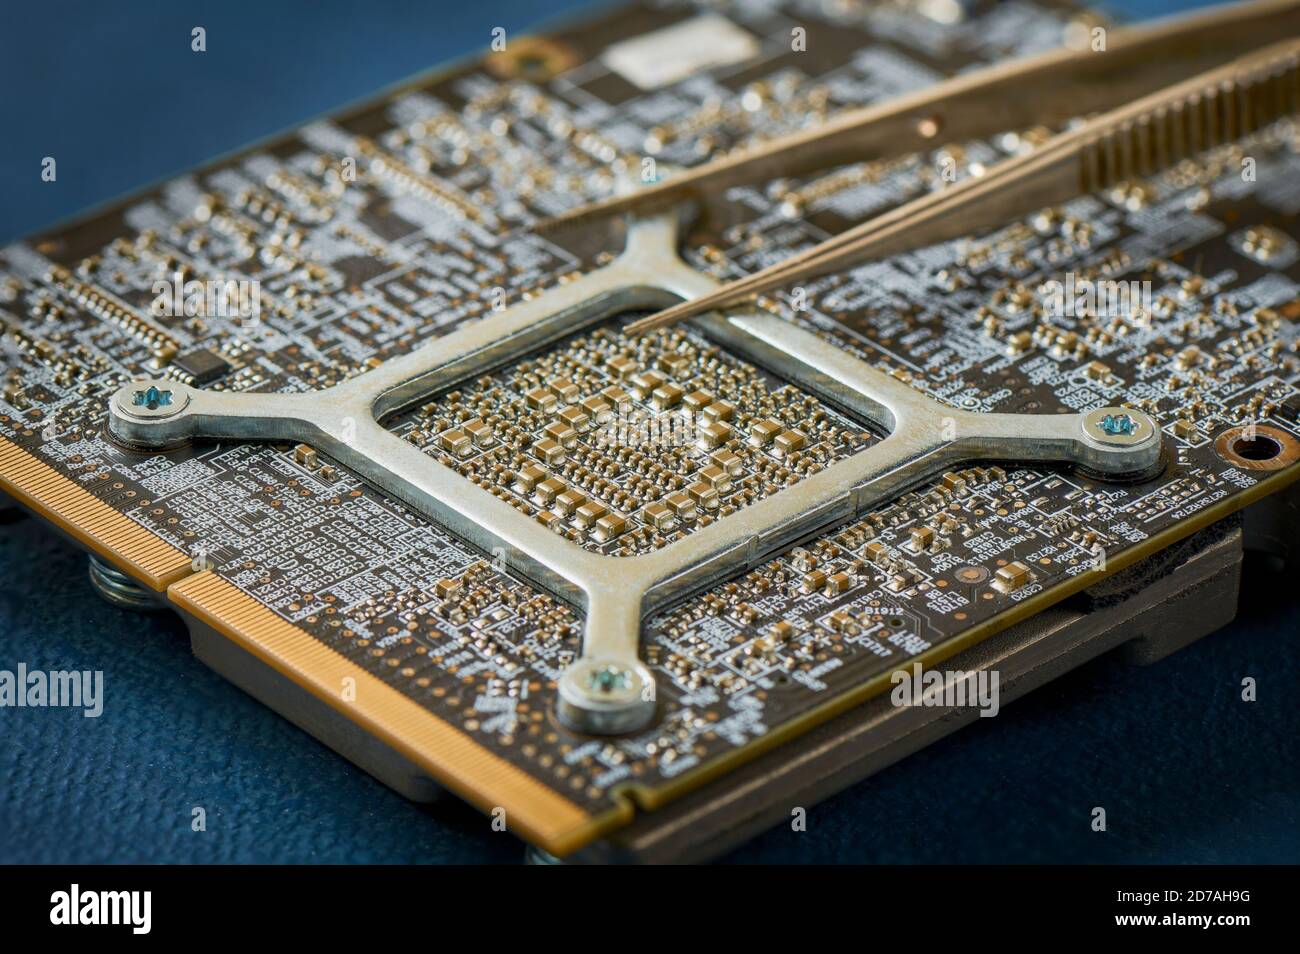 Electronic circuit board on blue background close up Stock Photo